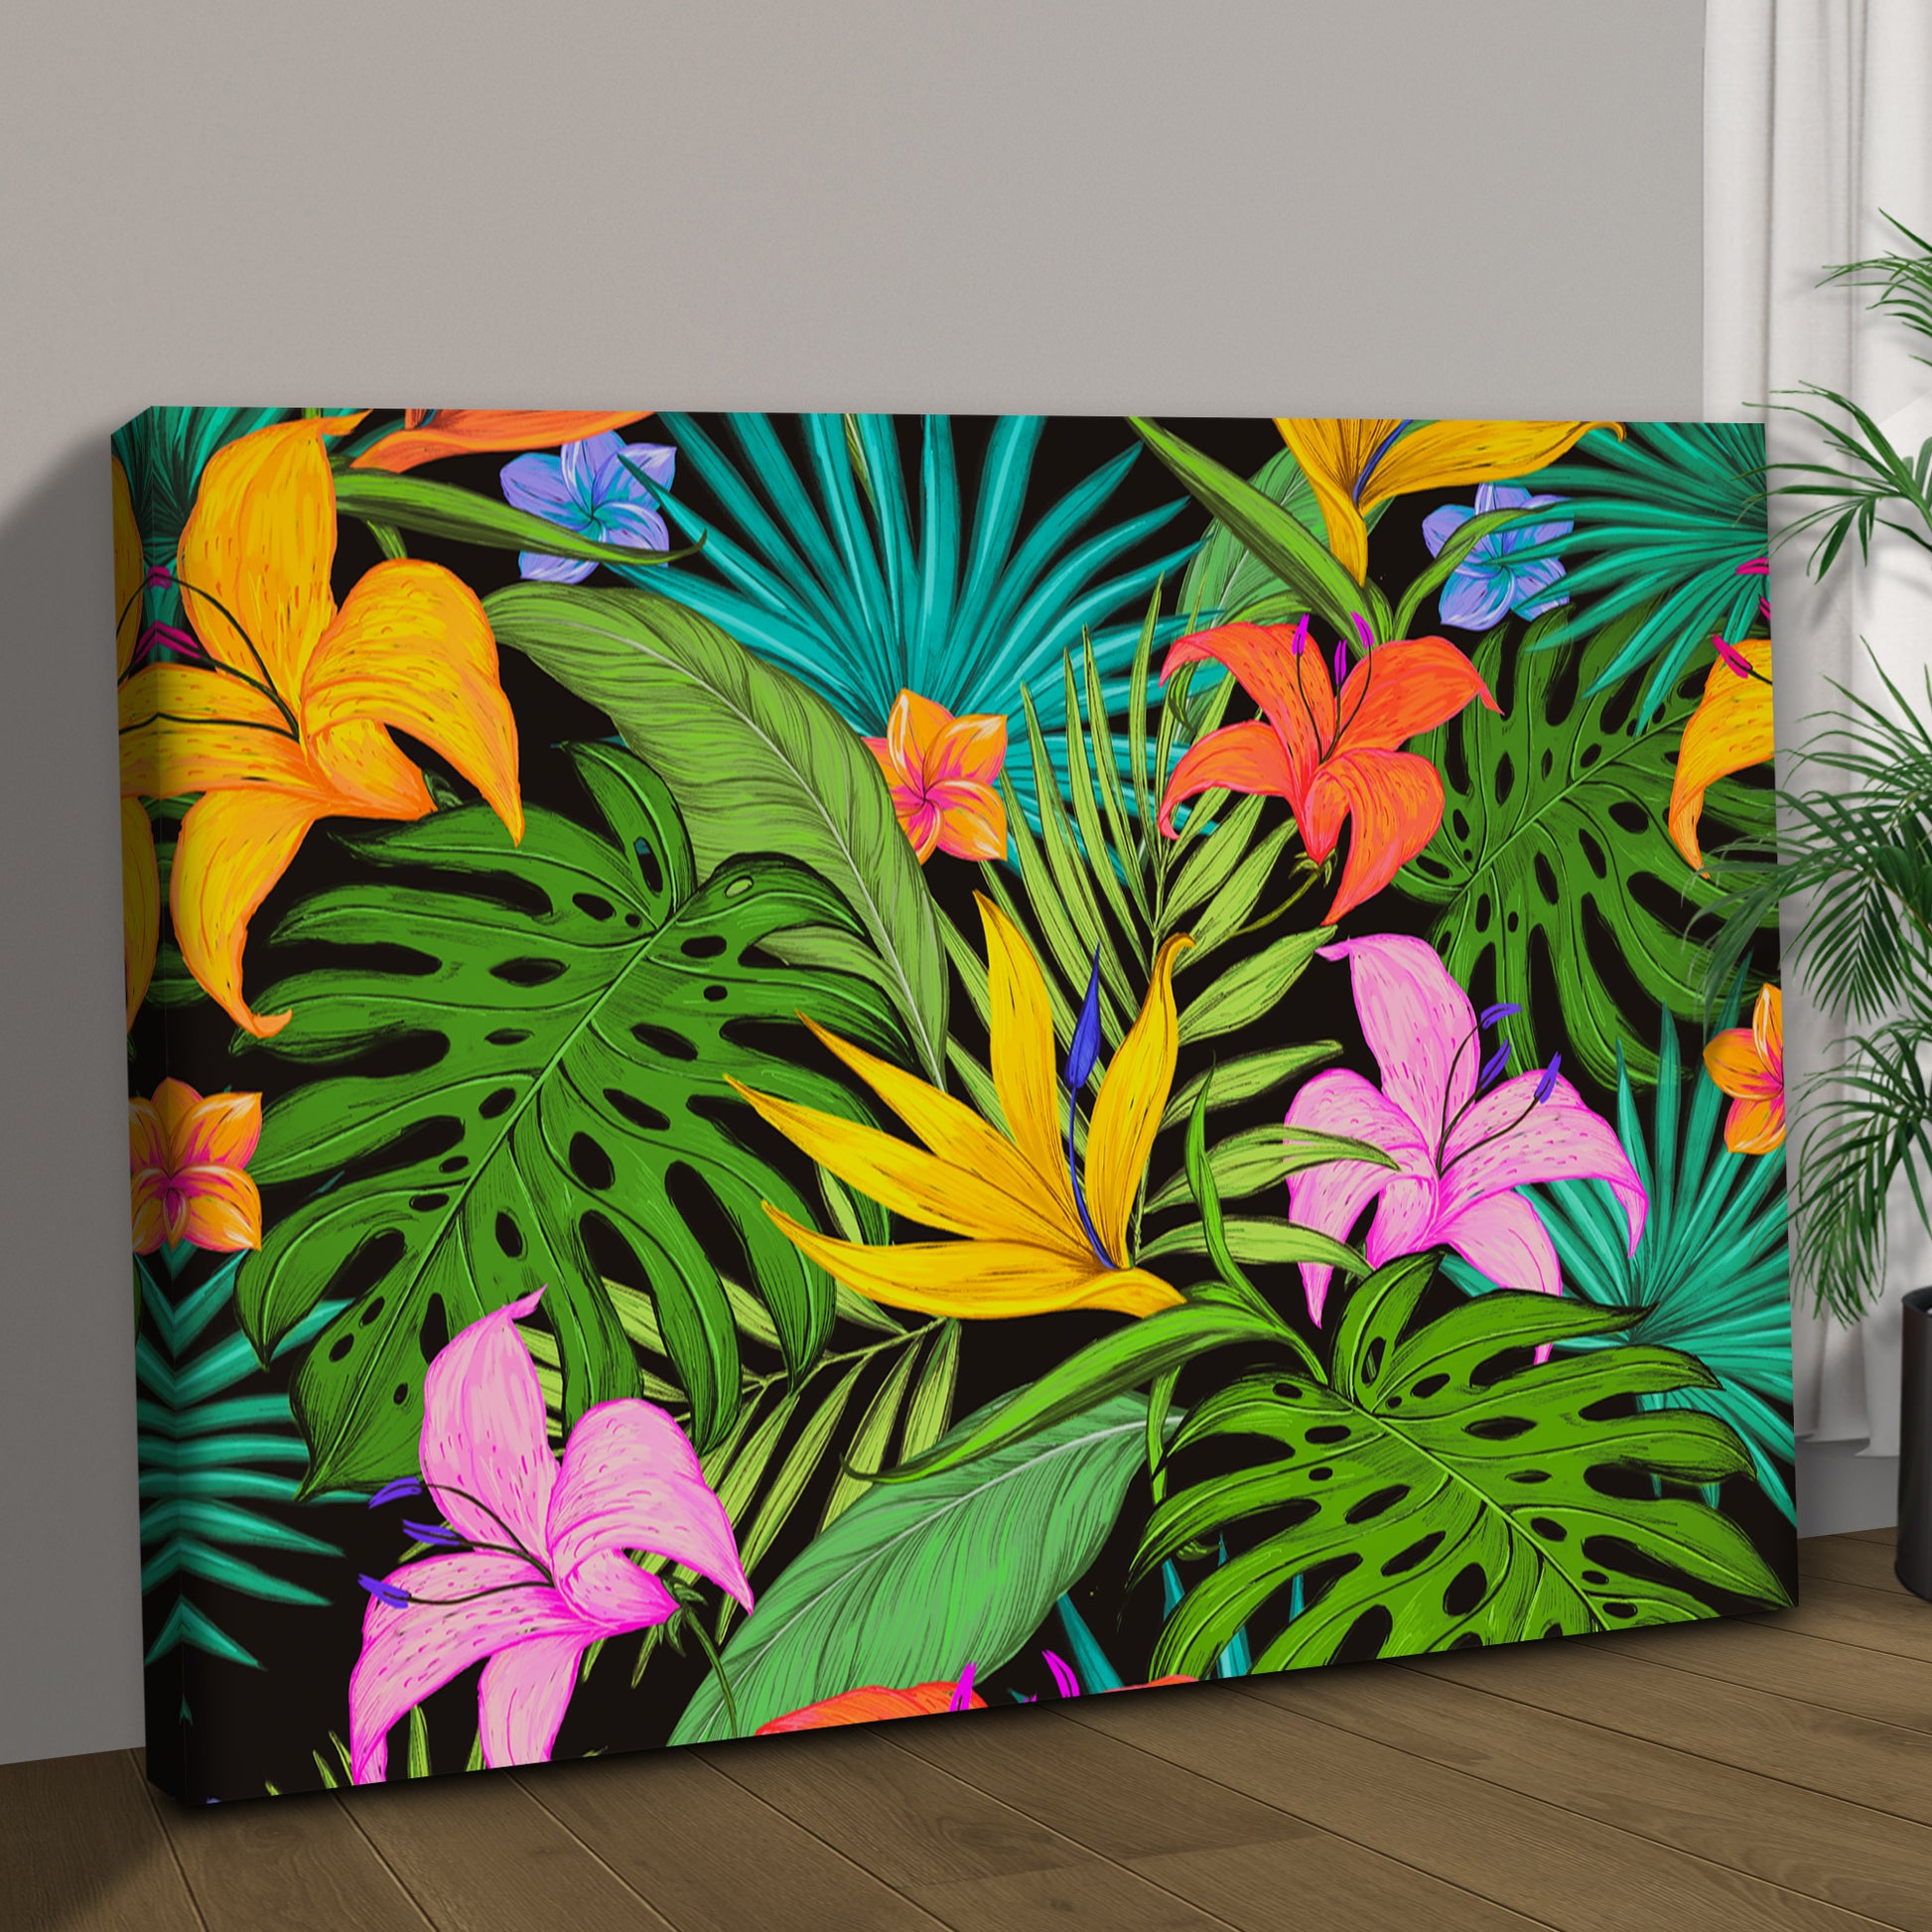 Colorful Tropical Plants Canvas Wall Art Style 1 - Image by Tailored Canvases